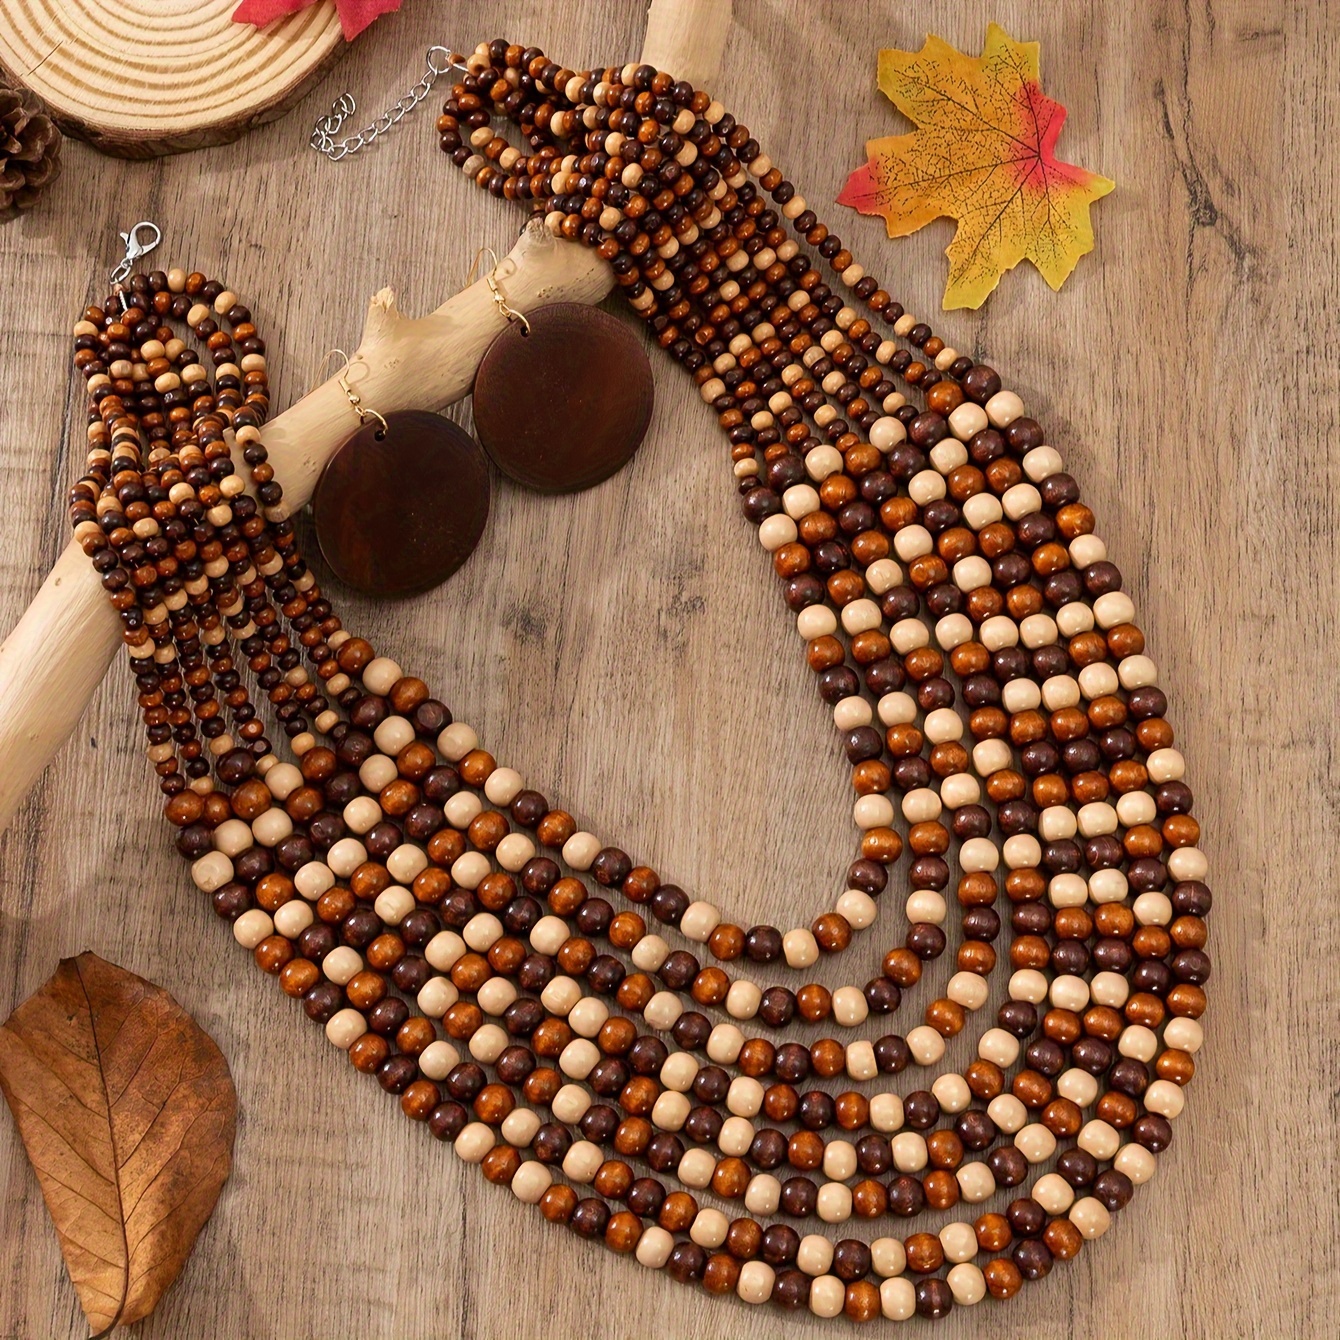 

3pcs Earrings Plus Necklace Boho Style Jewelry Set Made Of Wooden Beads Trendy Multi Layer Design Stunning Party Accessories